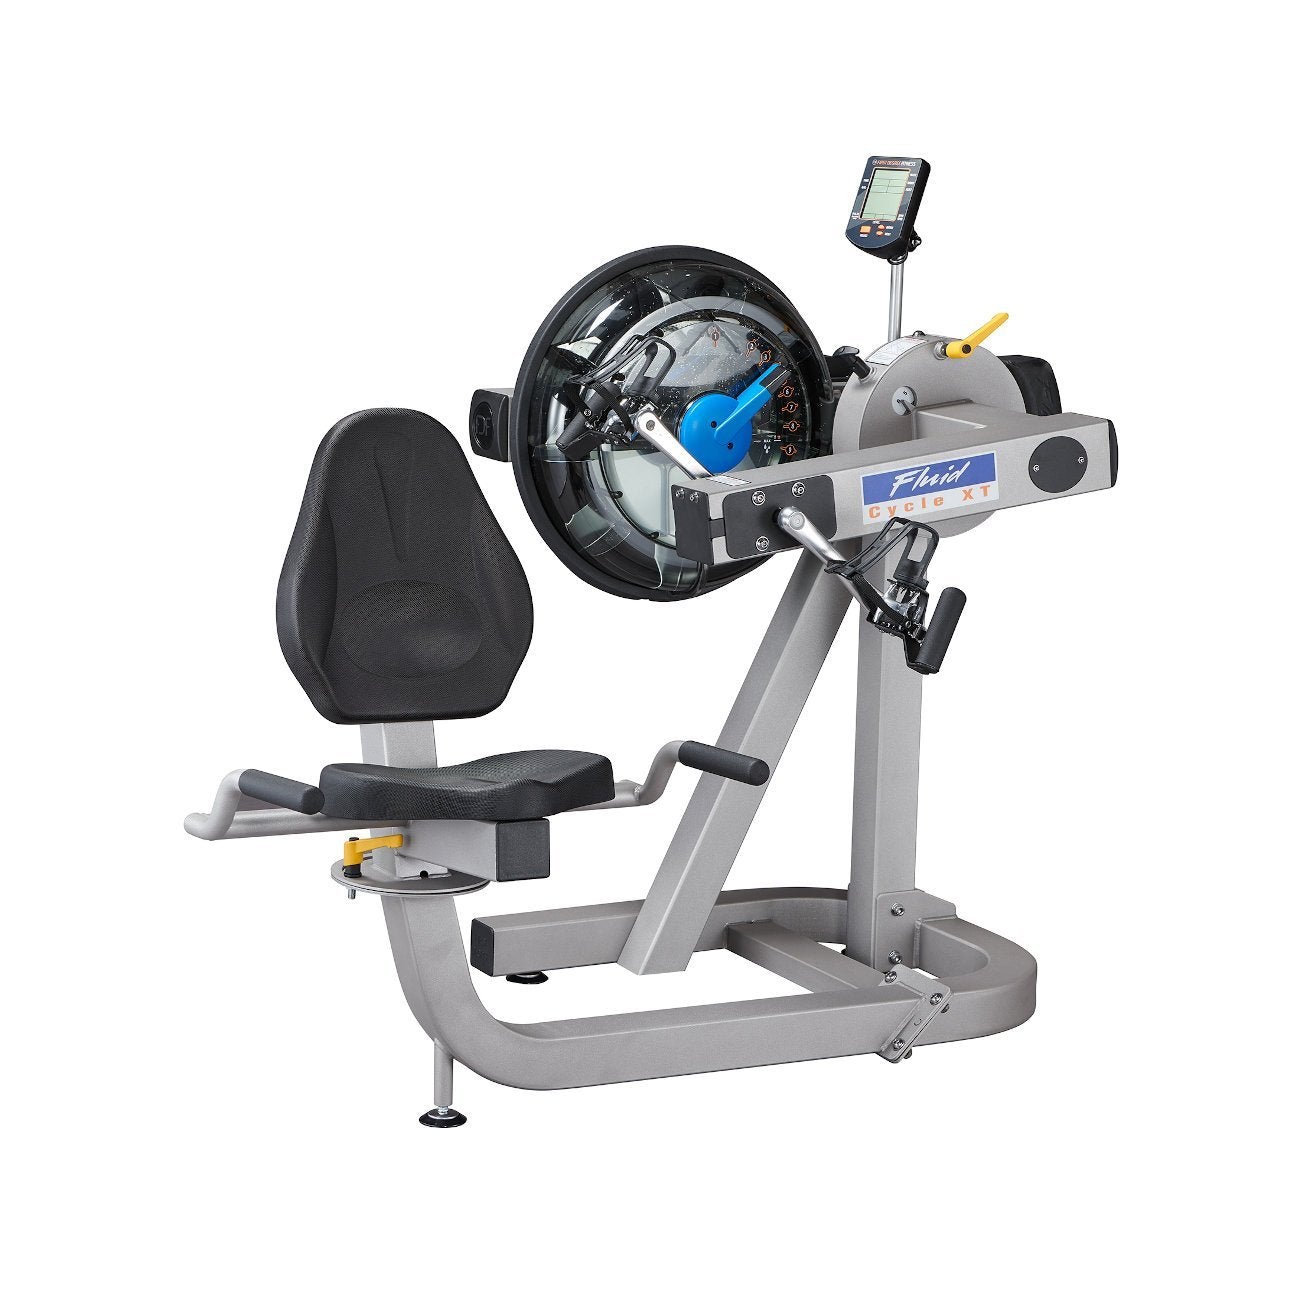 FDF Fluid Exercise E720 Cycle XT Multi-Functional Cross Trainer swivel seat.